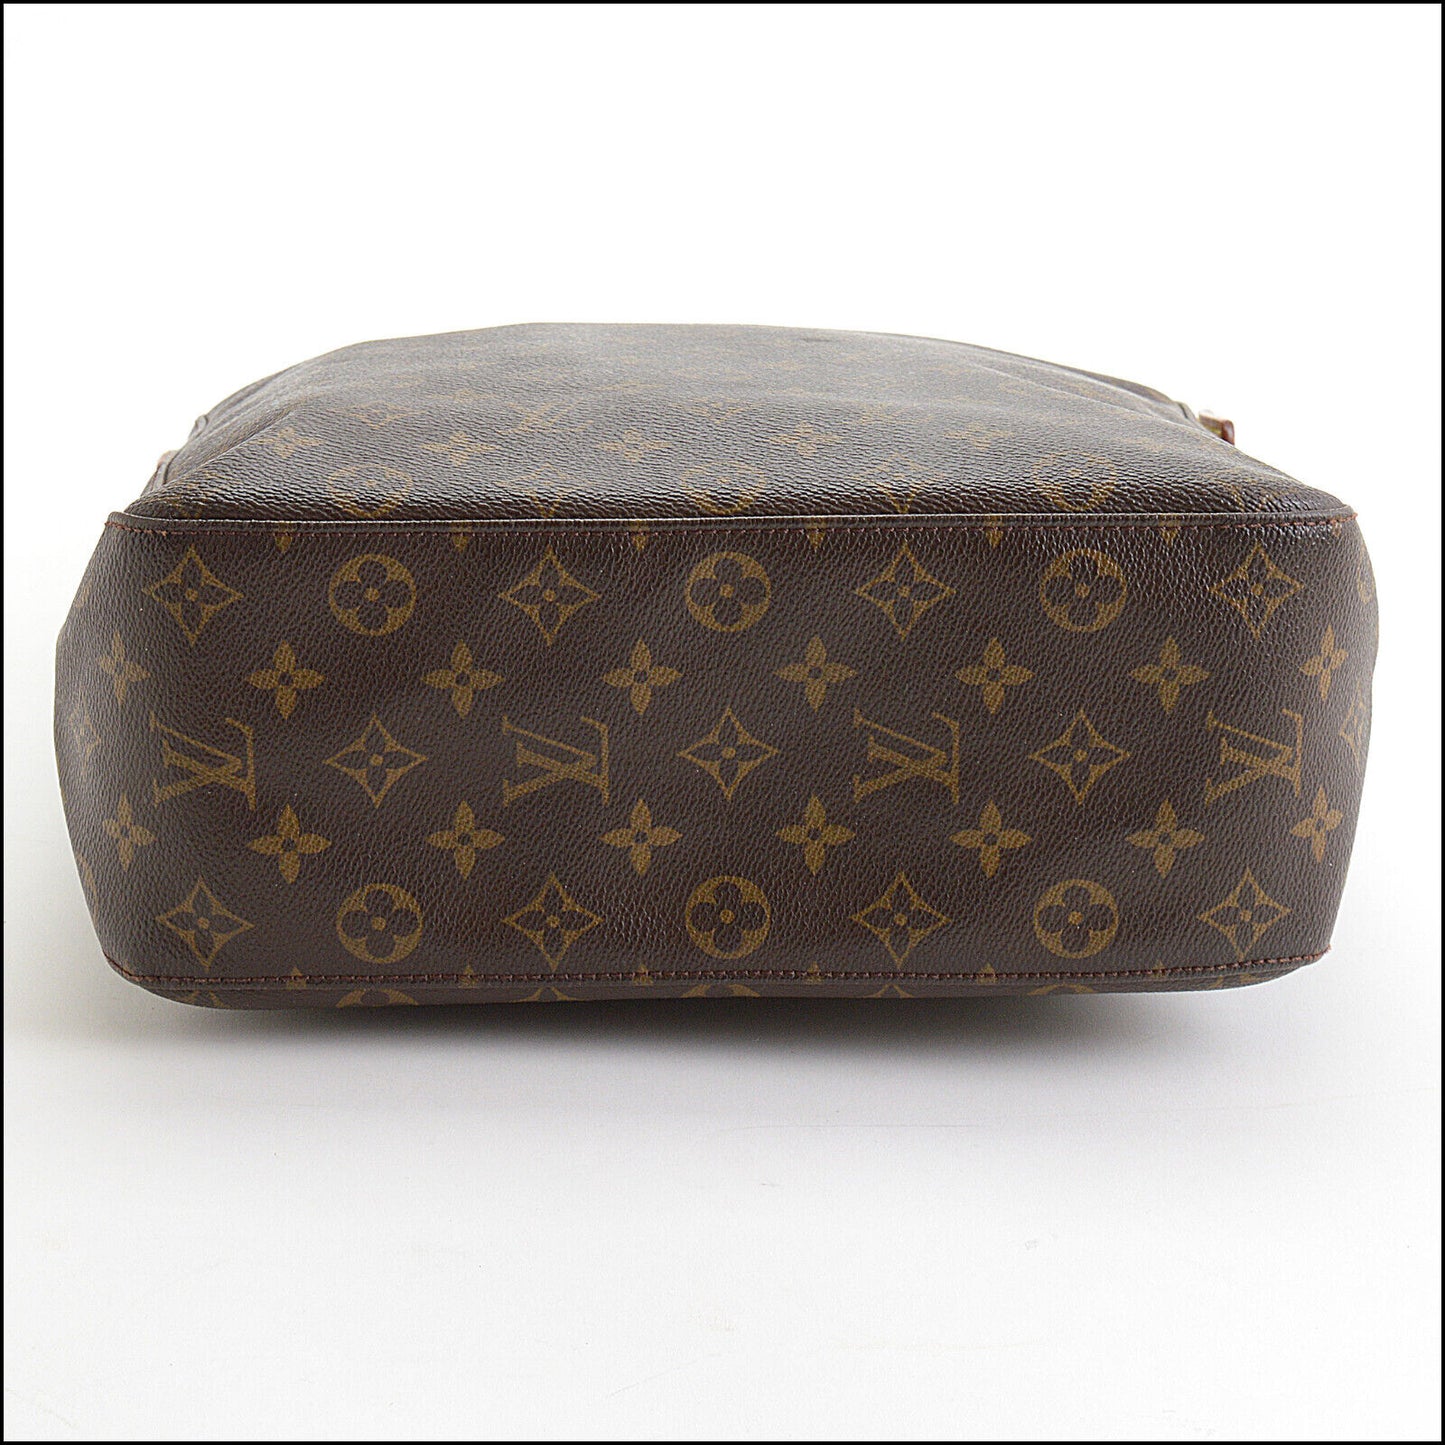 Louis Vuitton Monogram Canvas And Leather Looping GM Bag Louis Vuitton